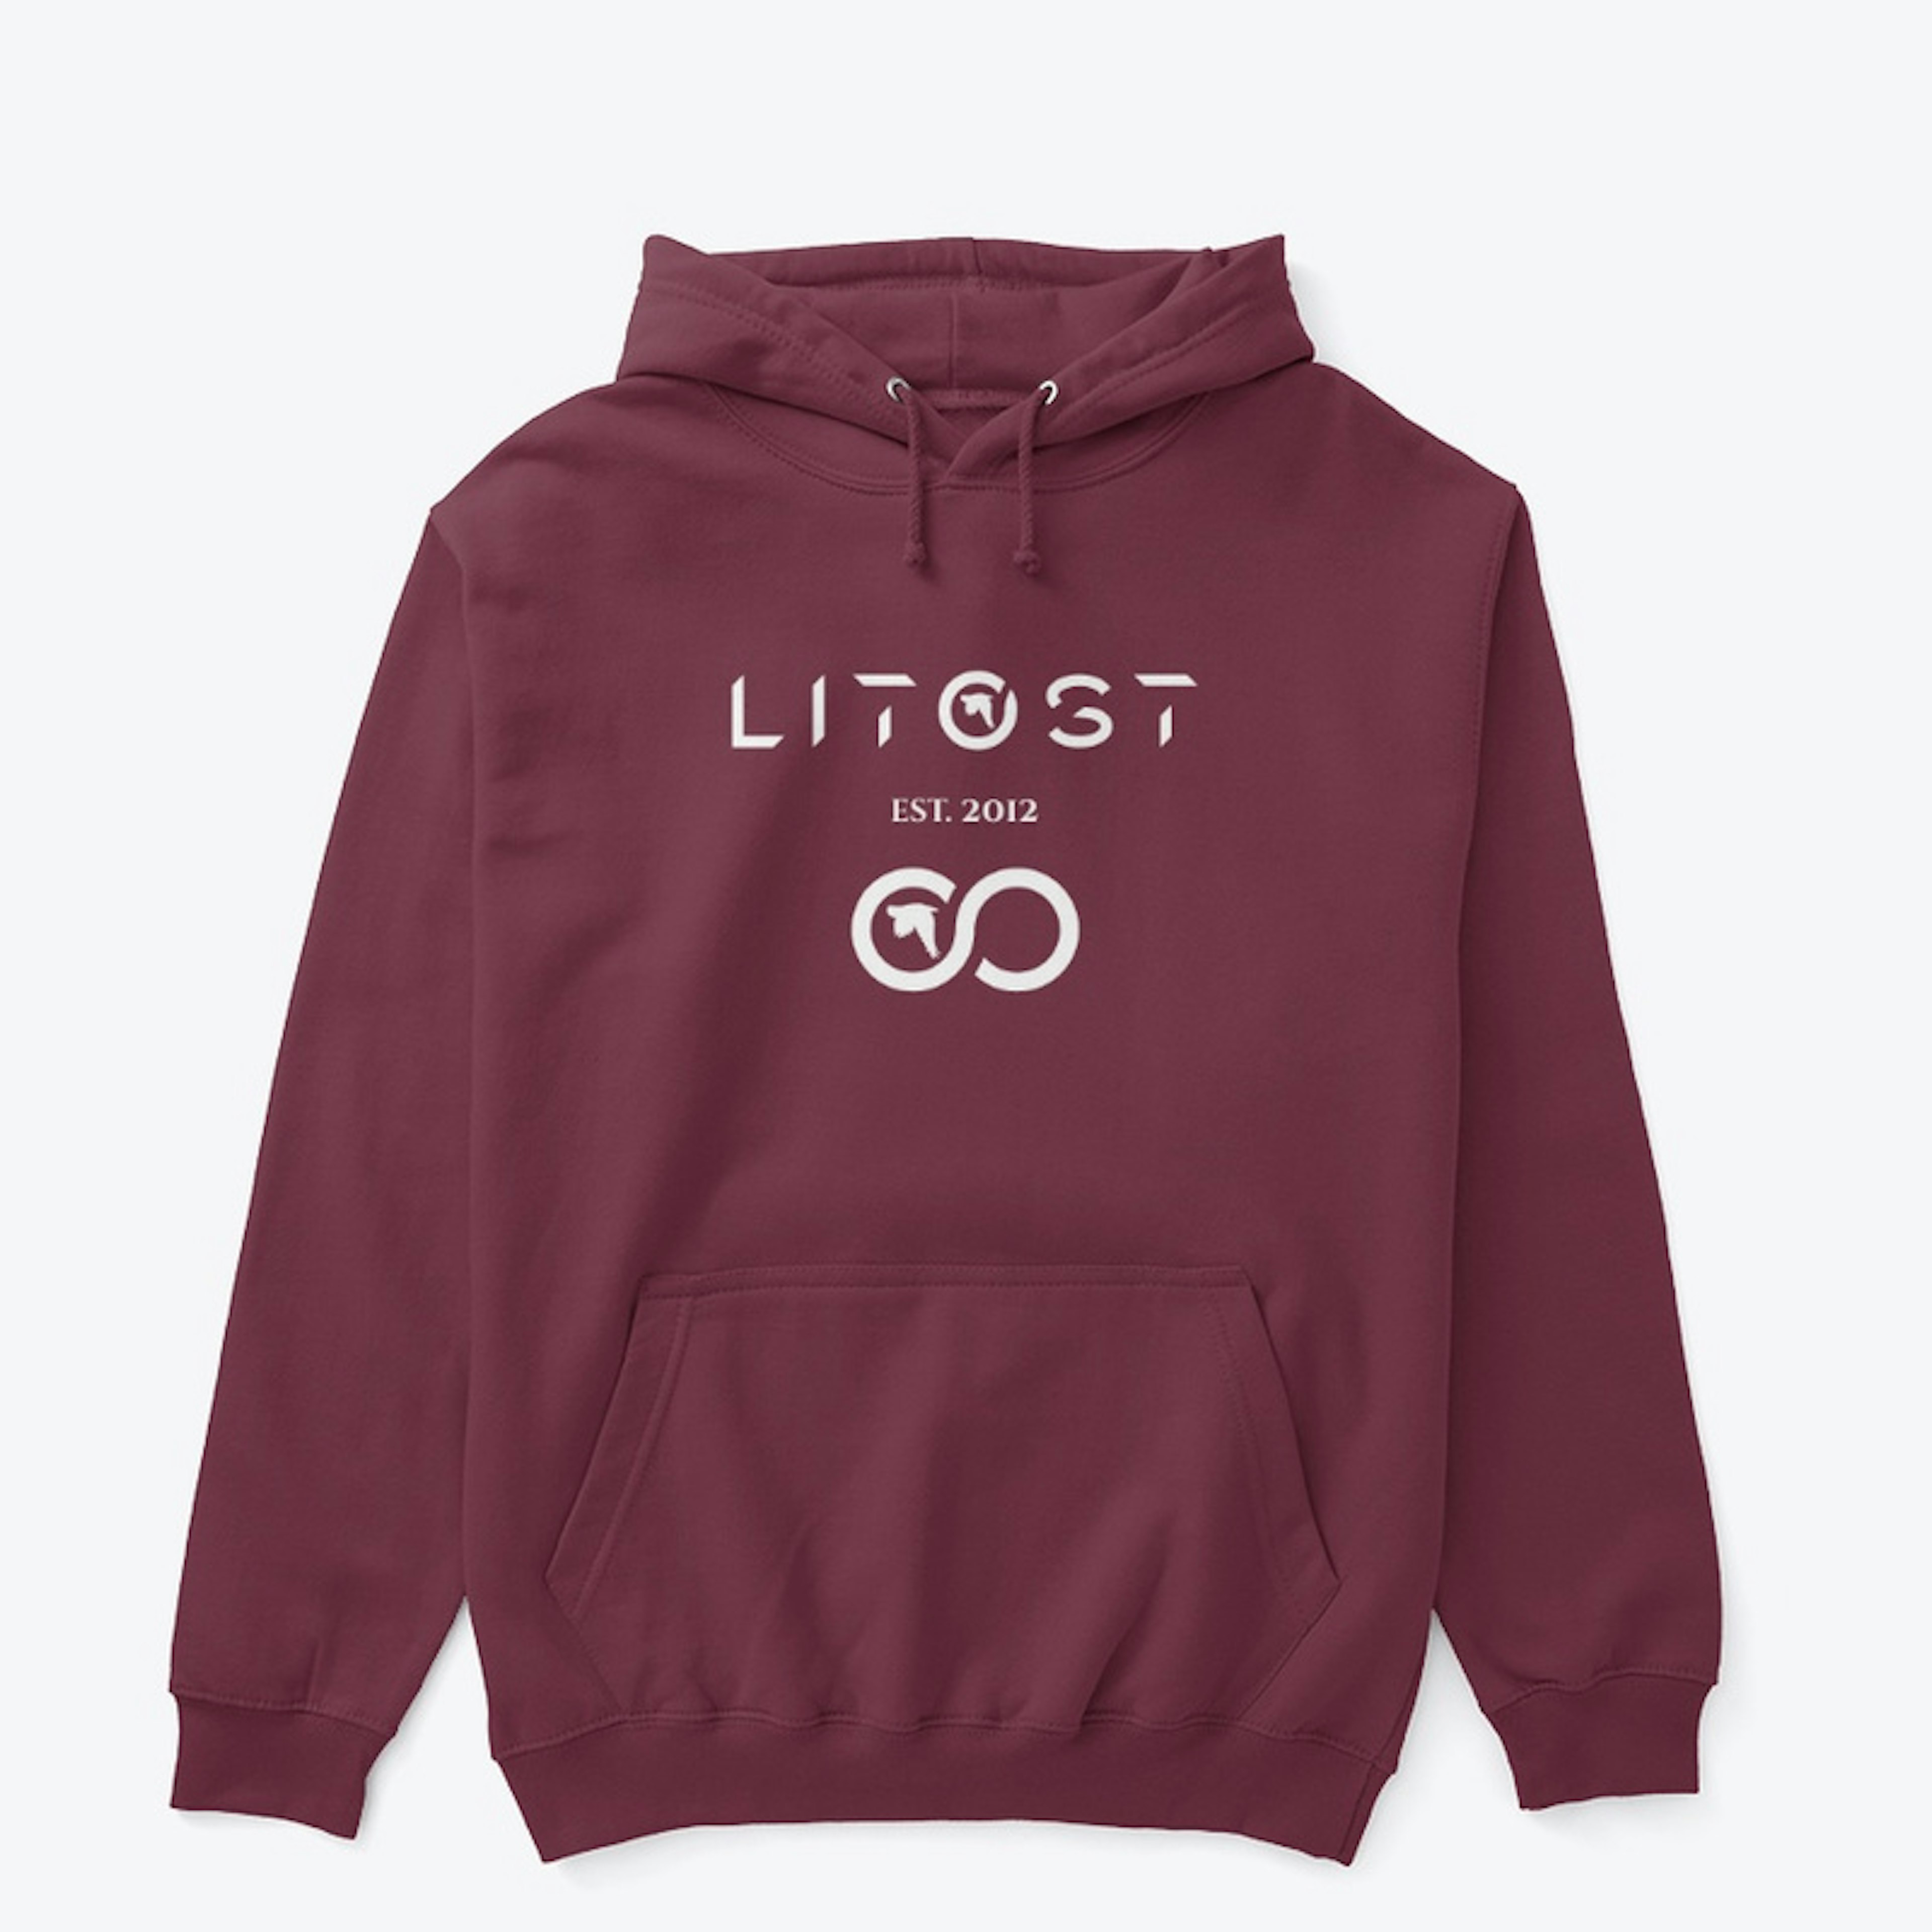 Litost 10th Anniversary Collection